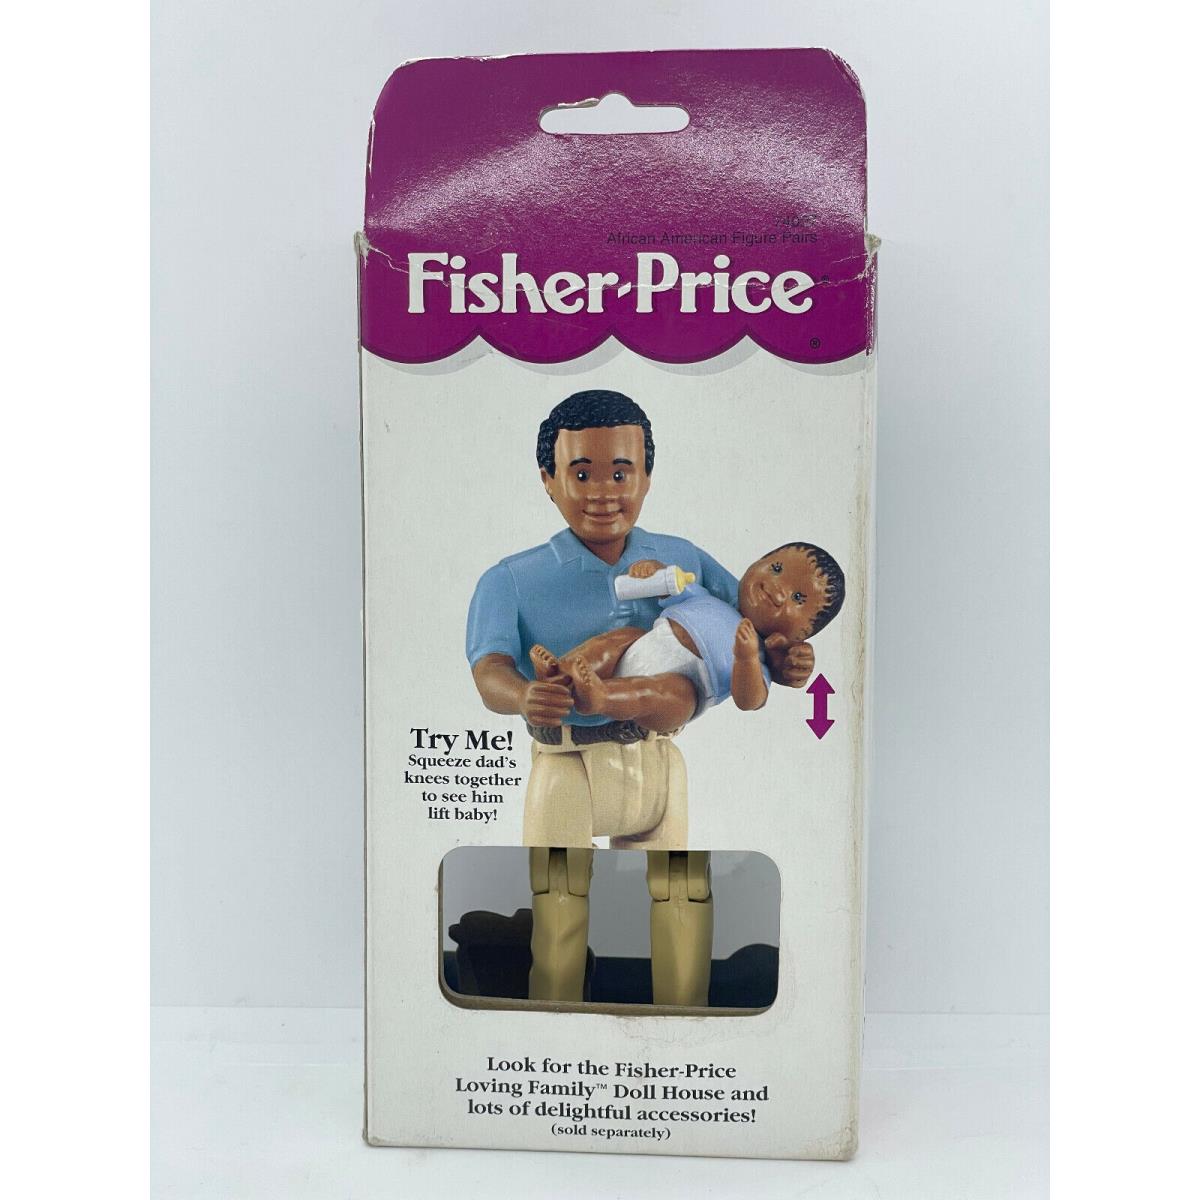 NEW2002 Fisher Price Loving Family Dollhouse 6 Dad and 2 Baby African American